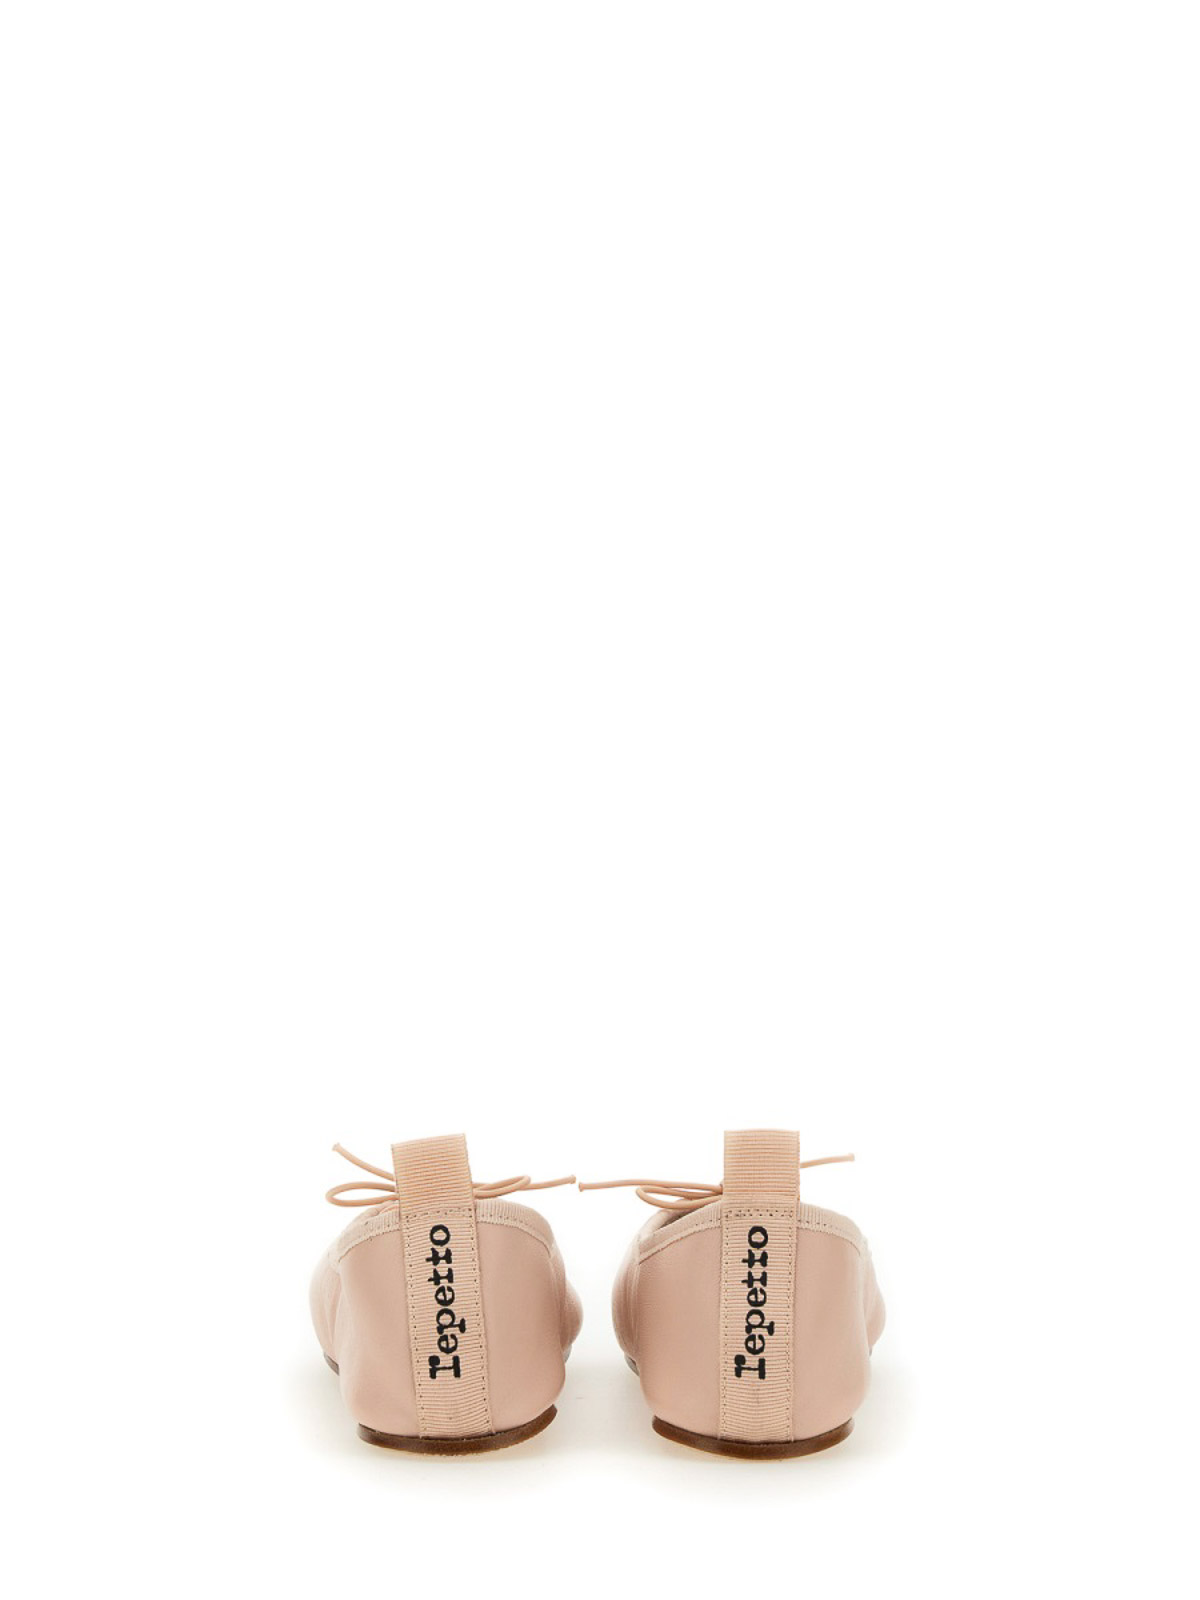 Shop Repetto Flat Shoes Janna In Nude & Neutrals